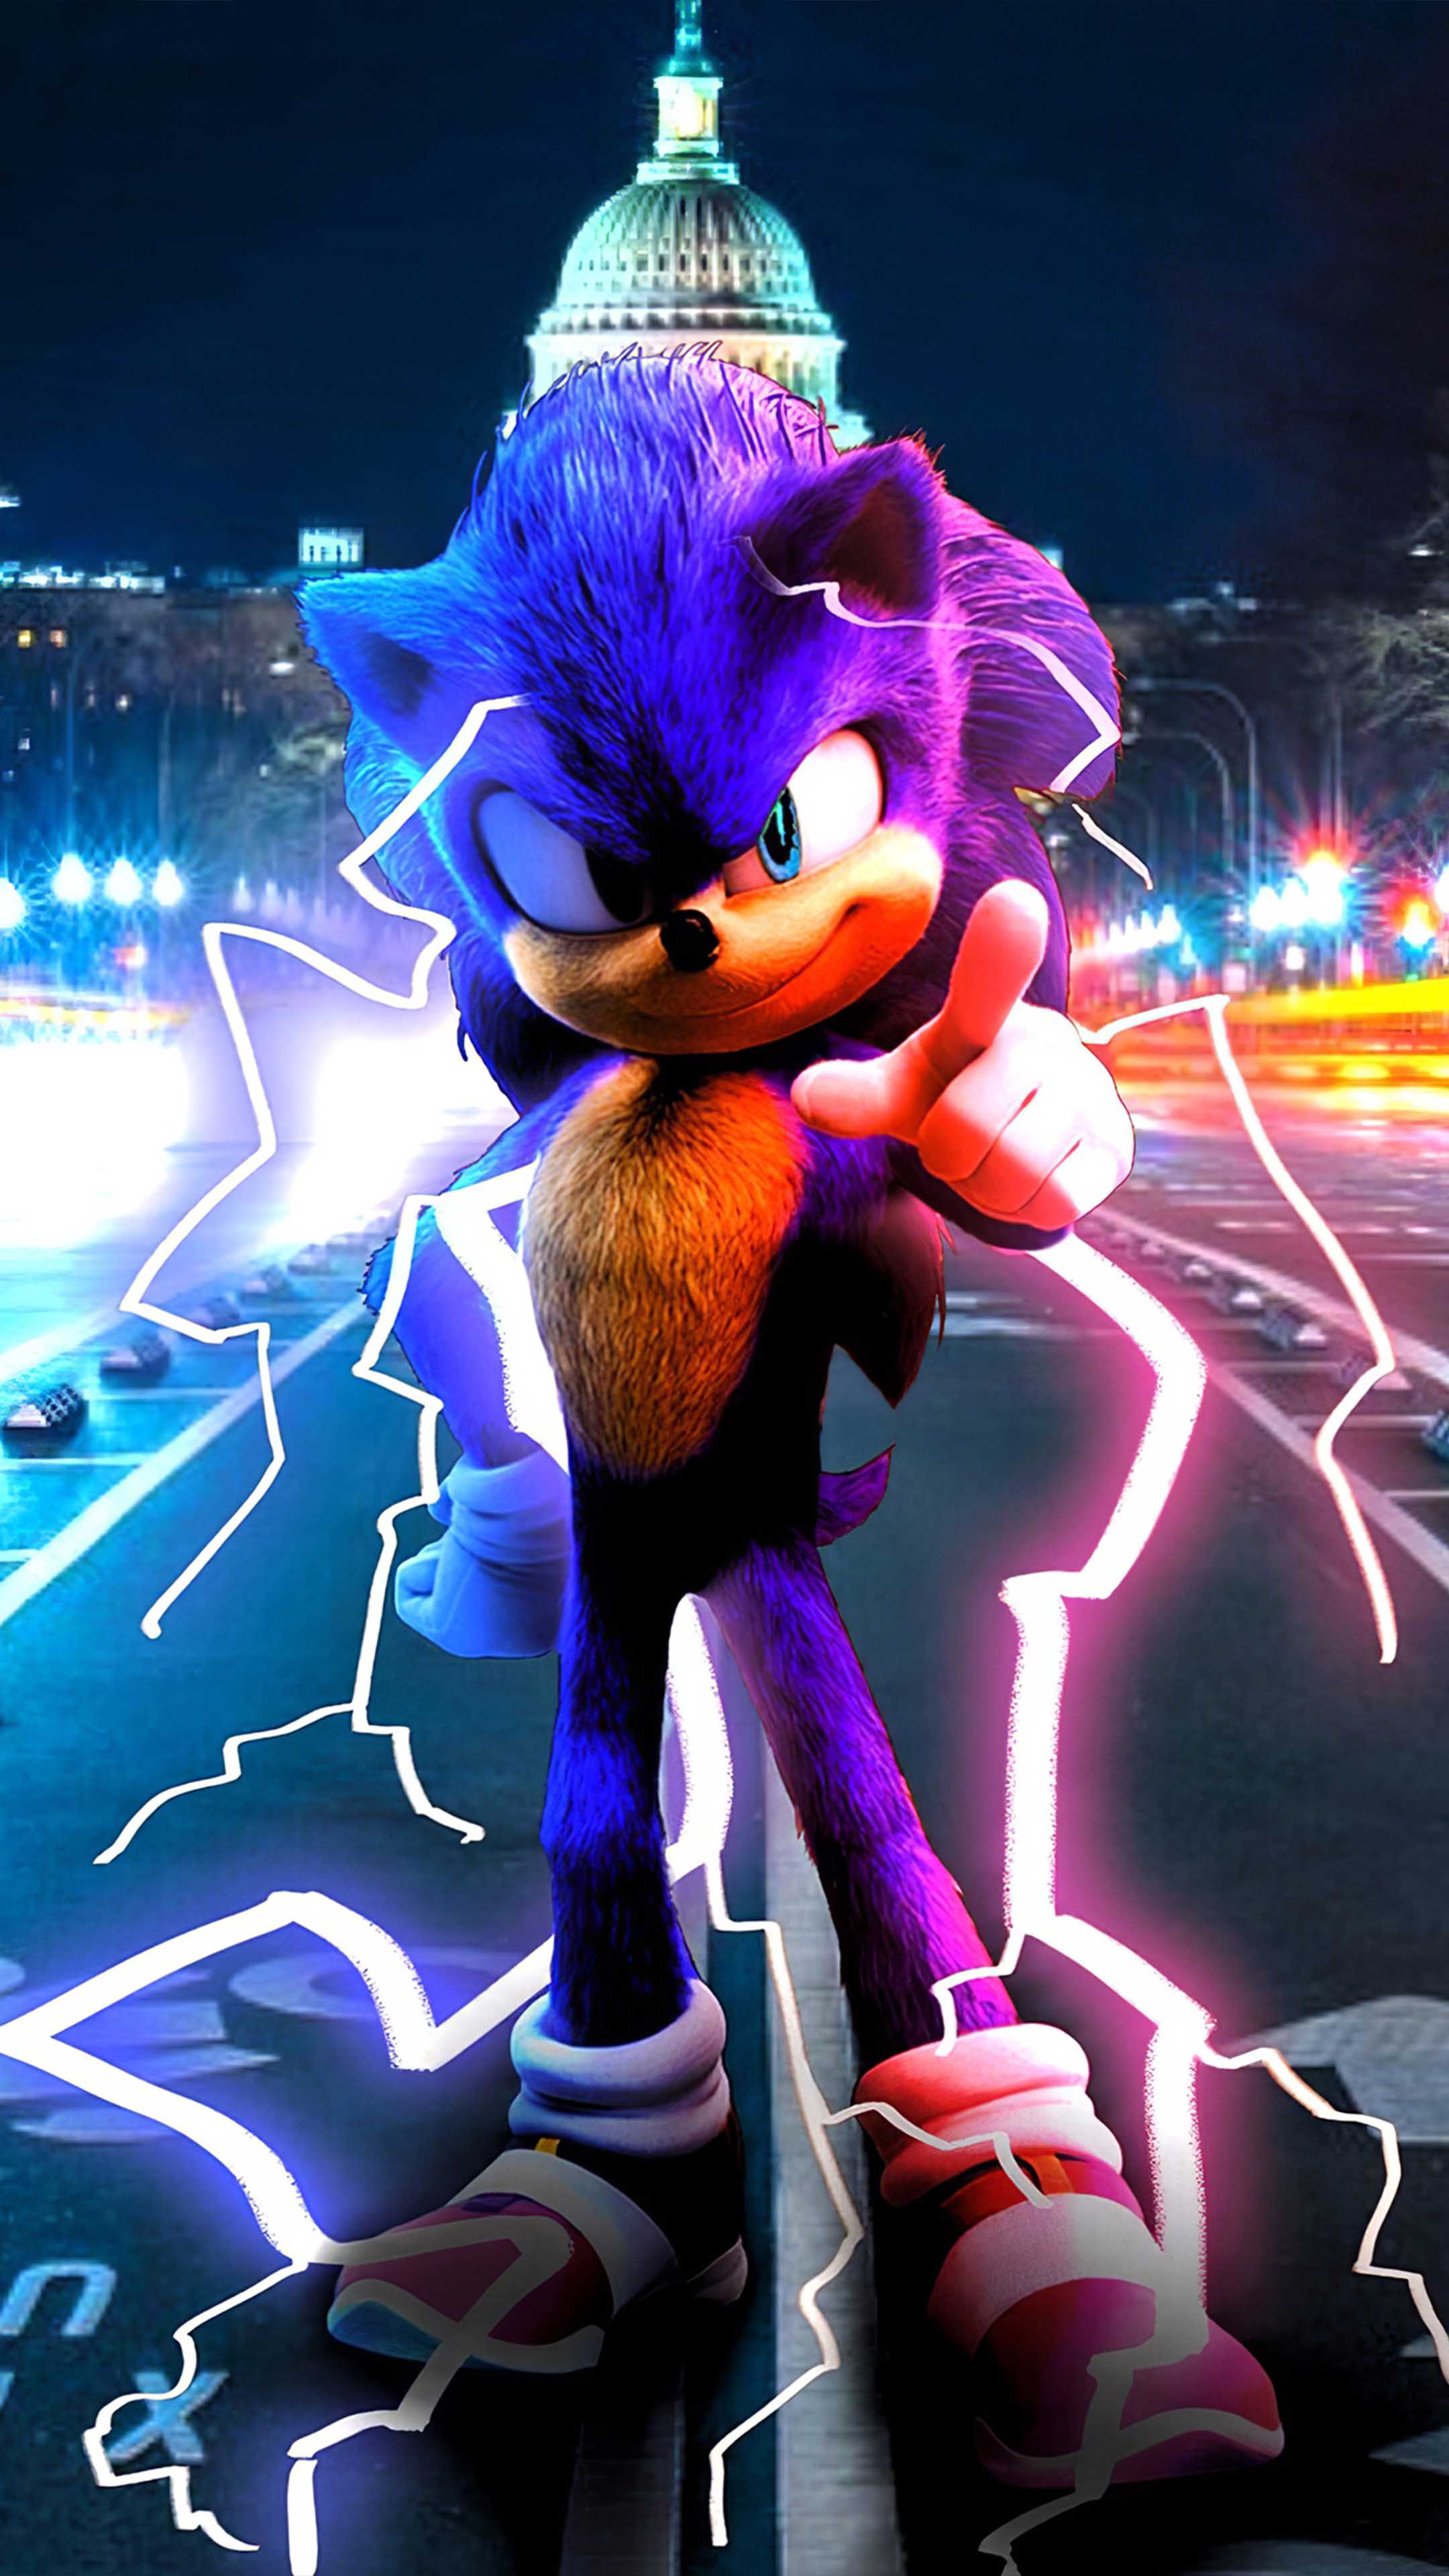 Sonic The Hedgehog Poster 2020 Free 4K Ultra HD Mobile Wallpaper